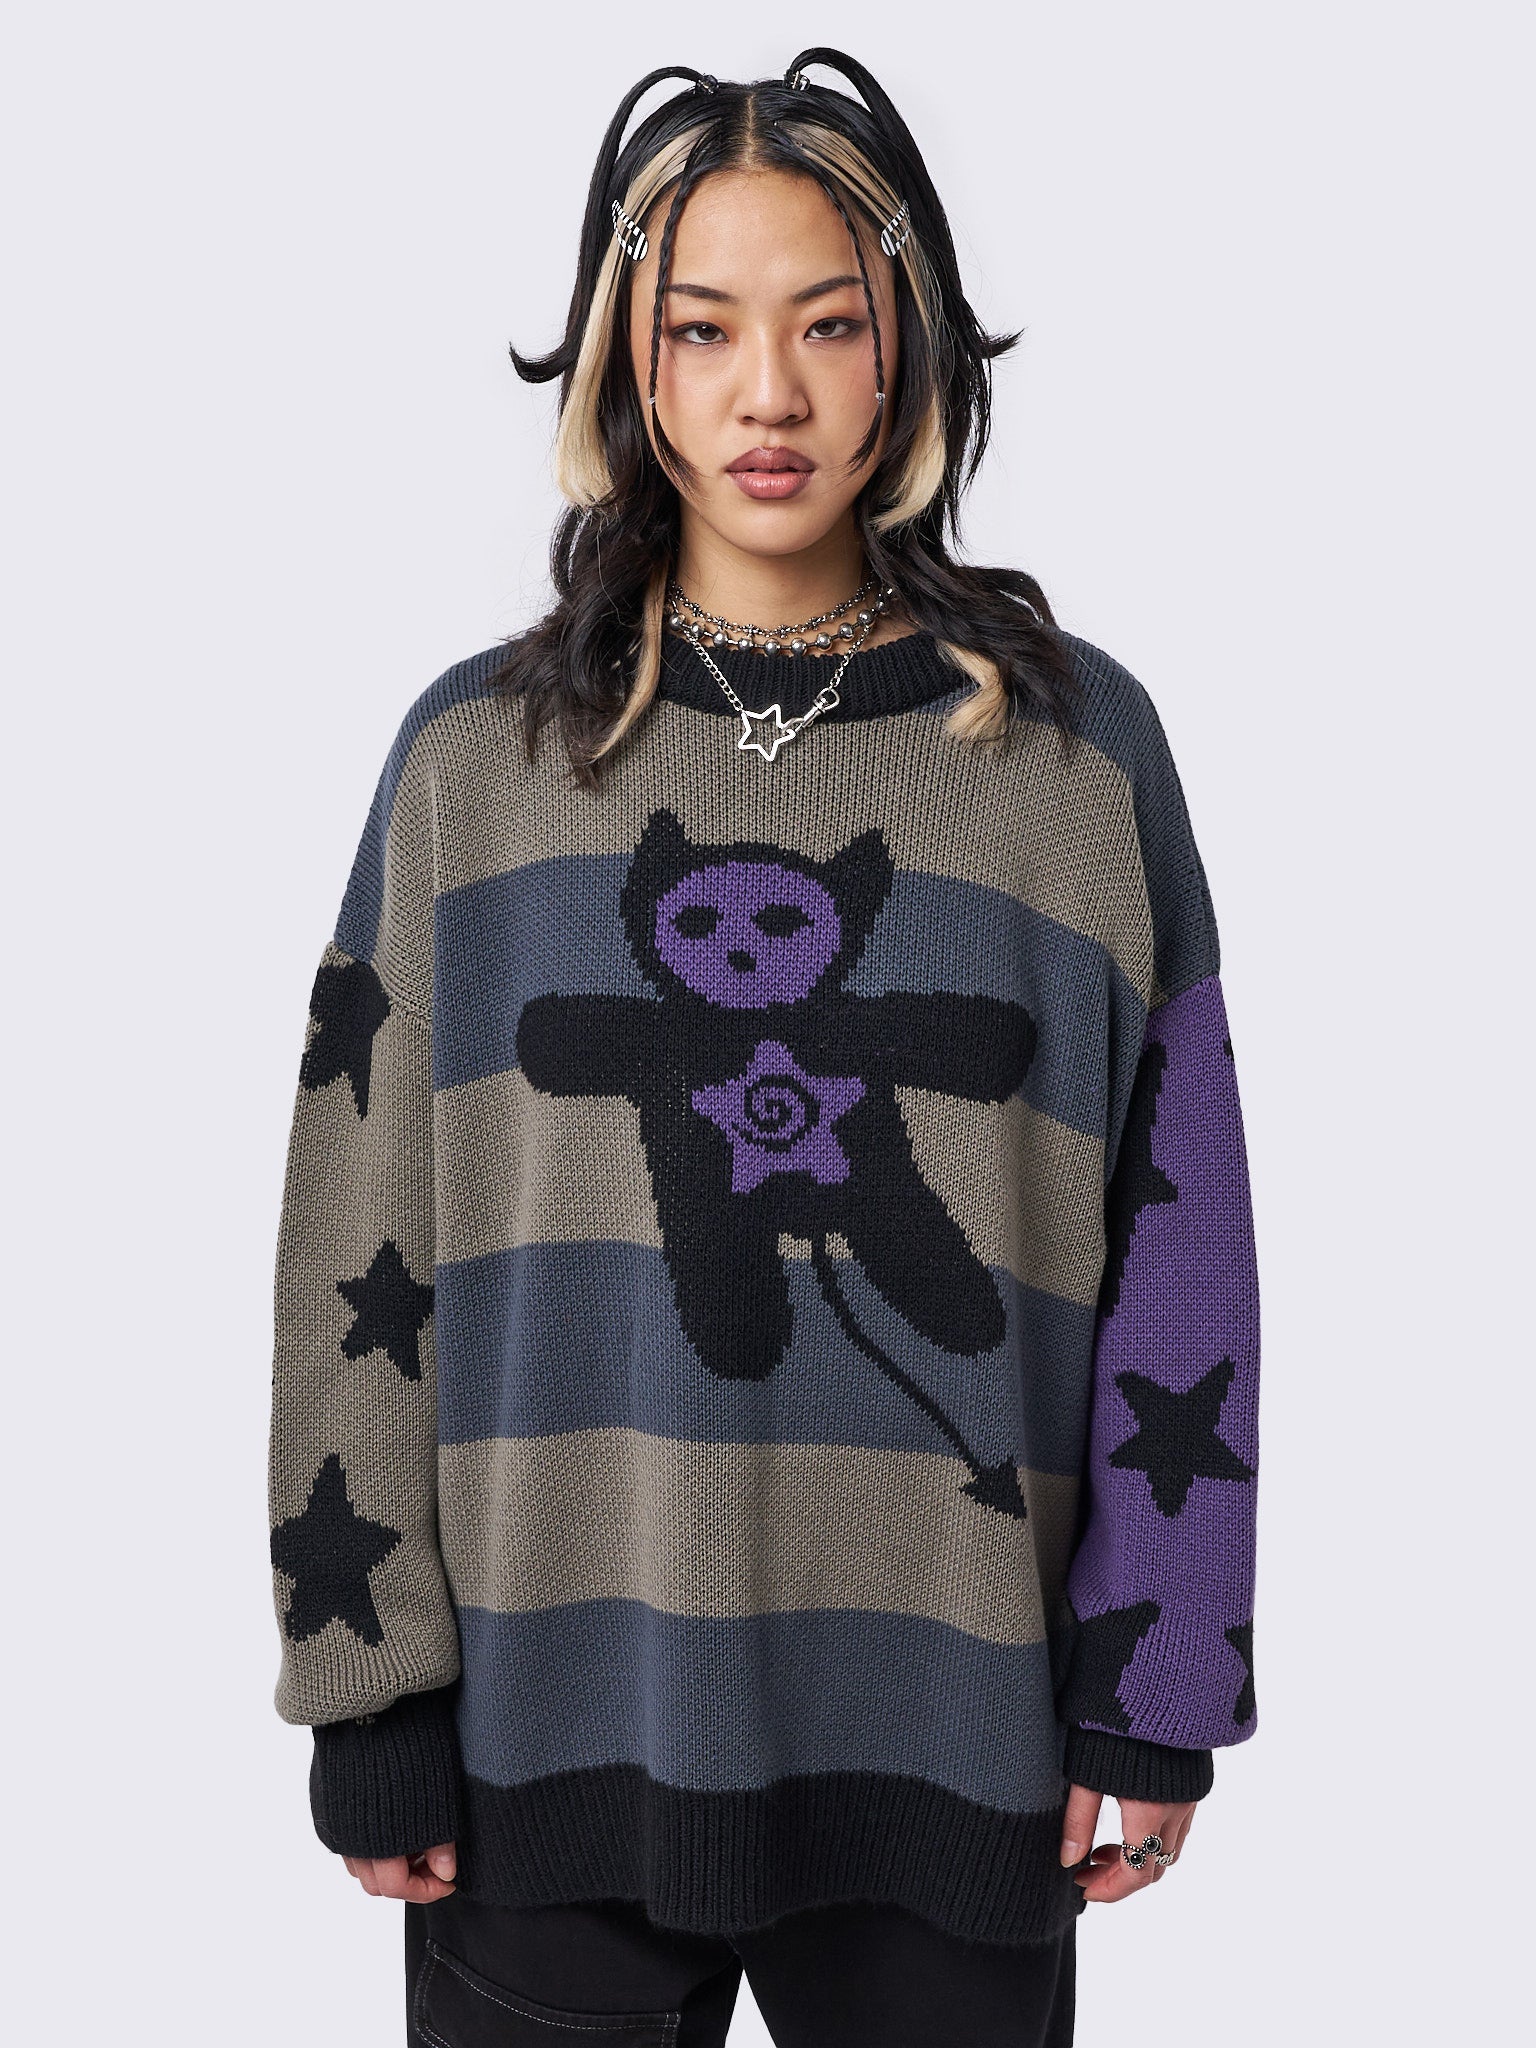 Black Oversized Sweater with Alien Swirl Eyes Graphic - Quirky Y2K